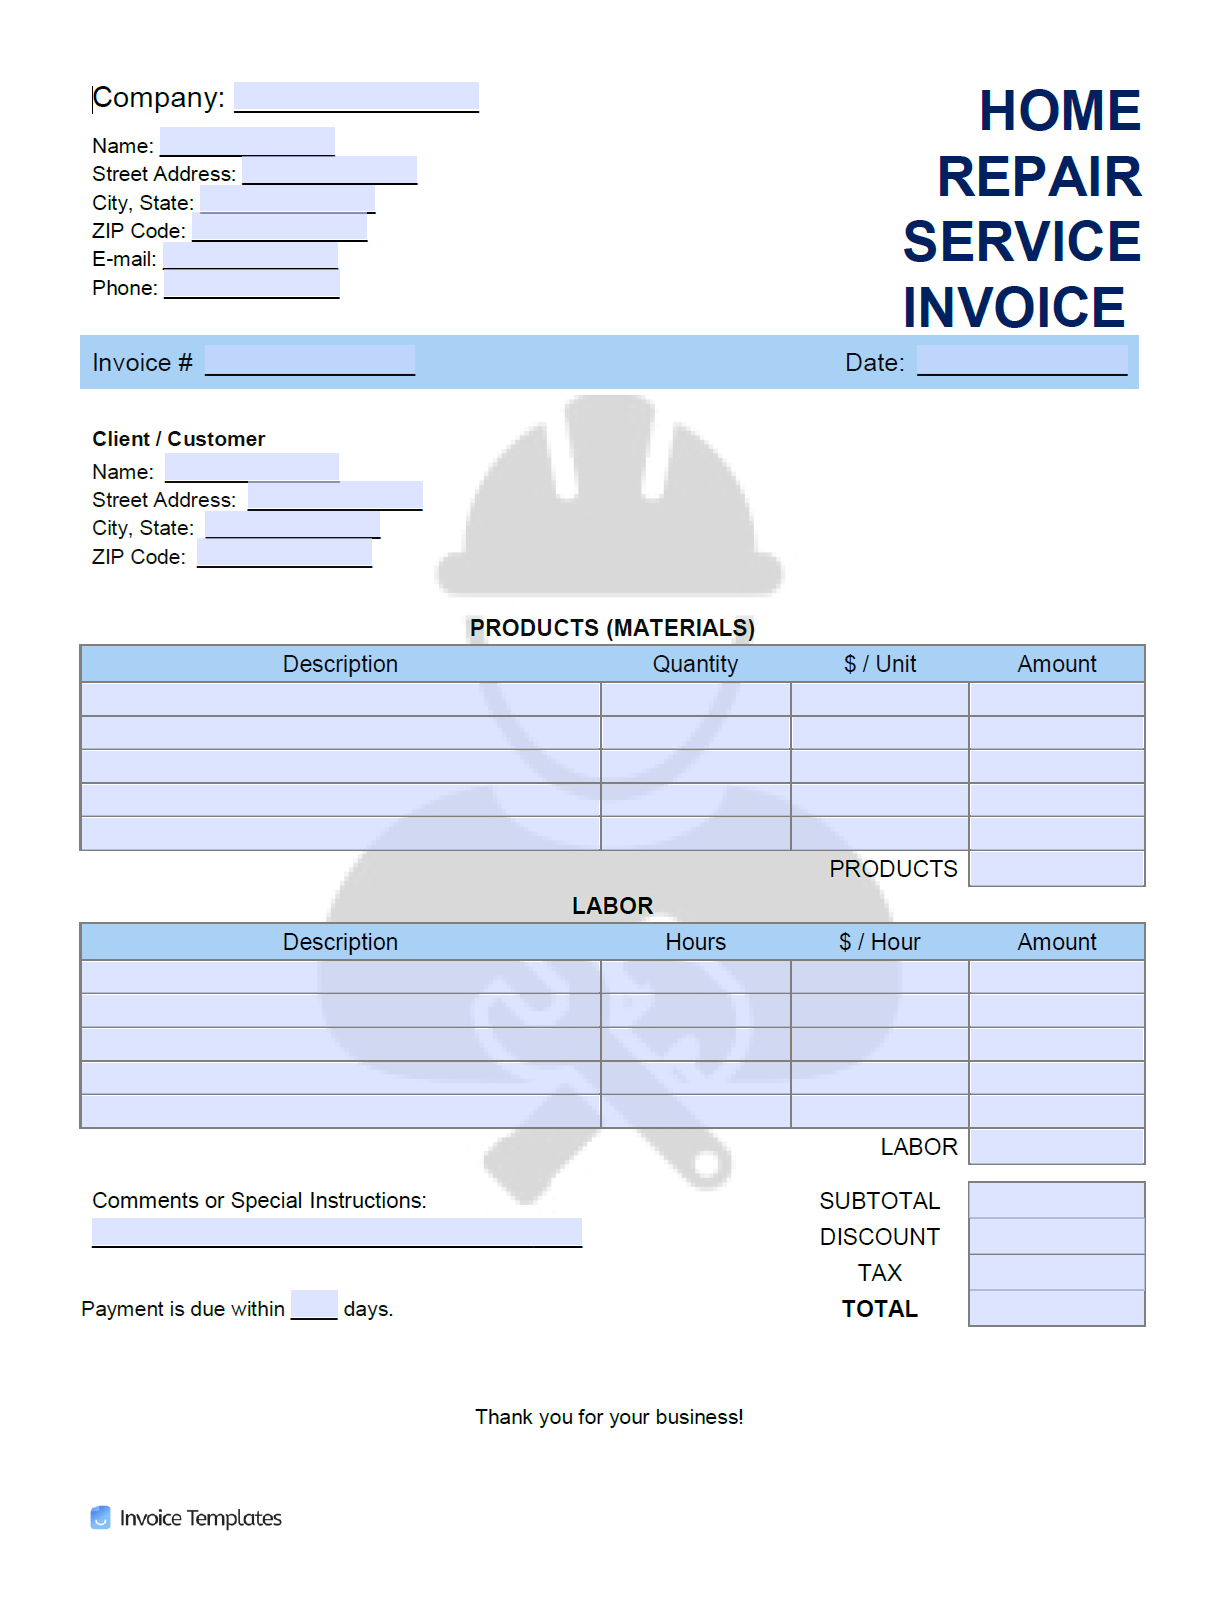 Free Home Repair Service Invoice Template  PDF  WORD  EXCEL For Maintenance Invoice Template Free